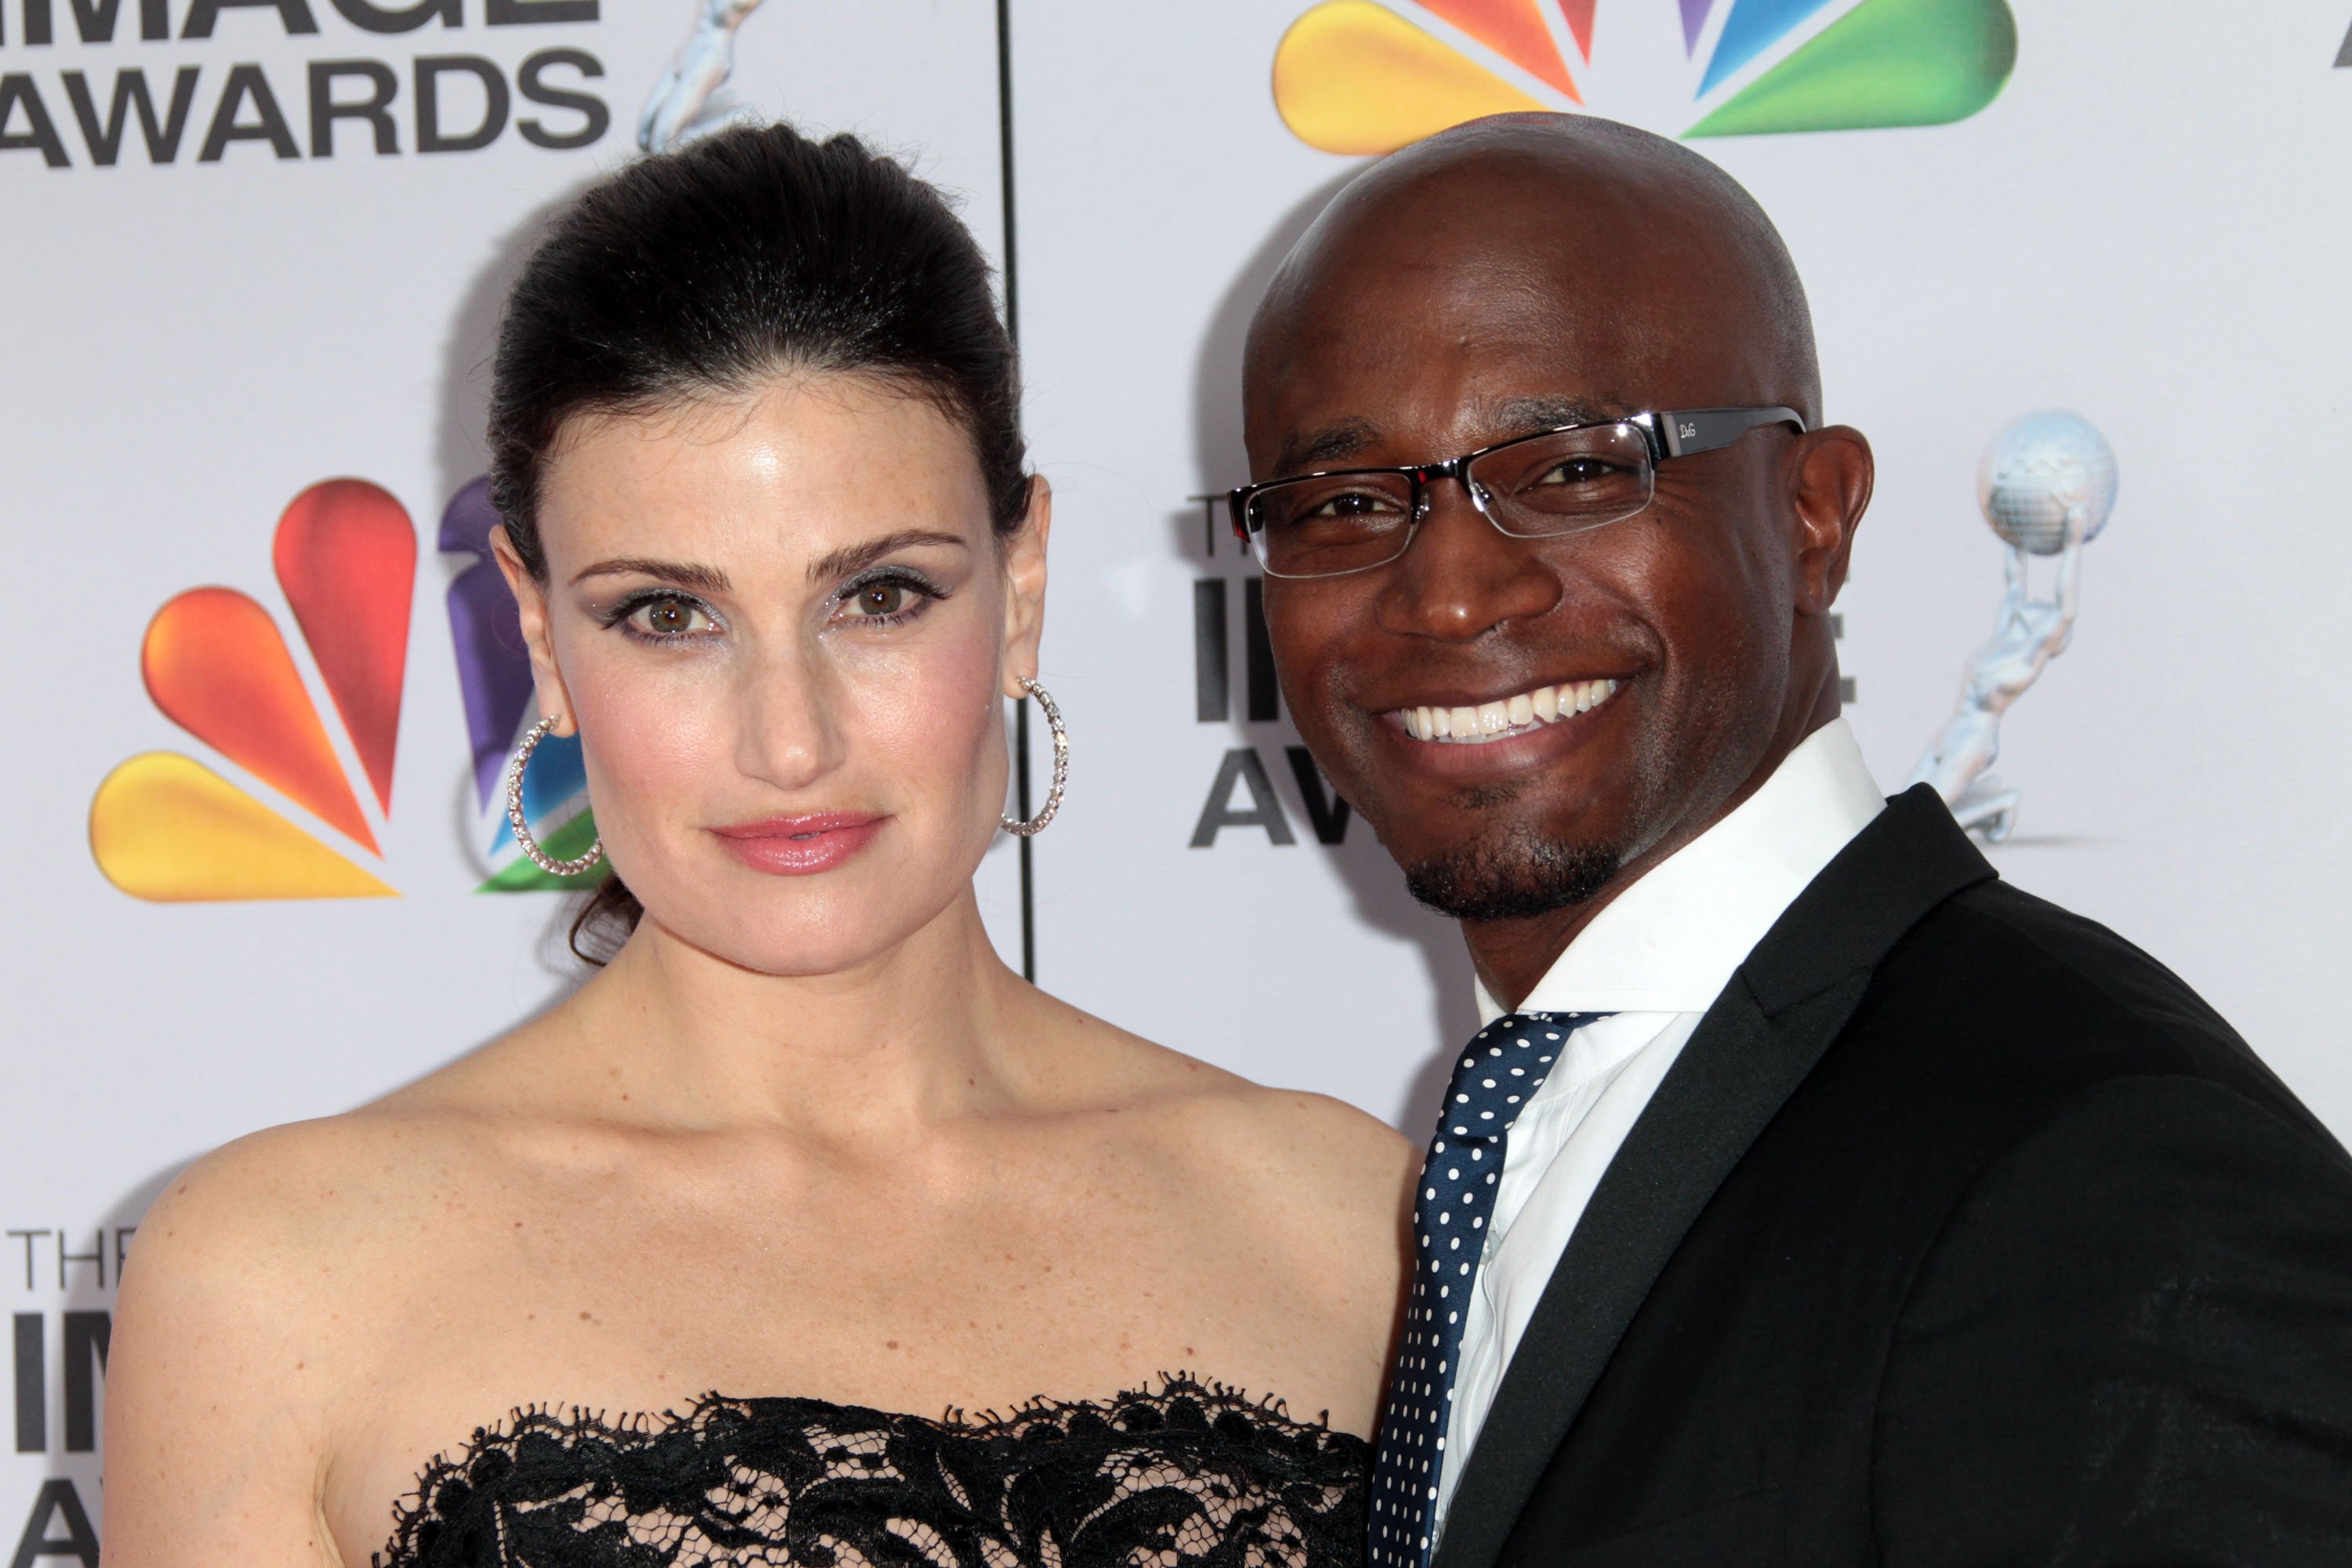 Actress Idina Menzel (L) and actor Taye Diggs arrive at the 43rd NAACP Image Awards held at The Shrine Auditorium on February 17, 2012 in Los Angeles, California.